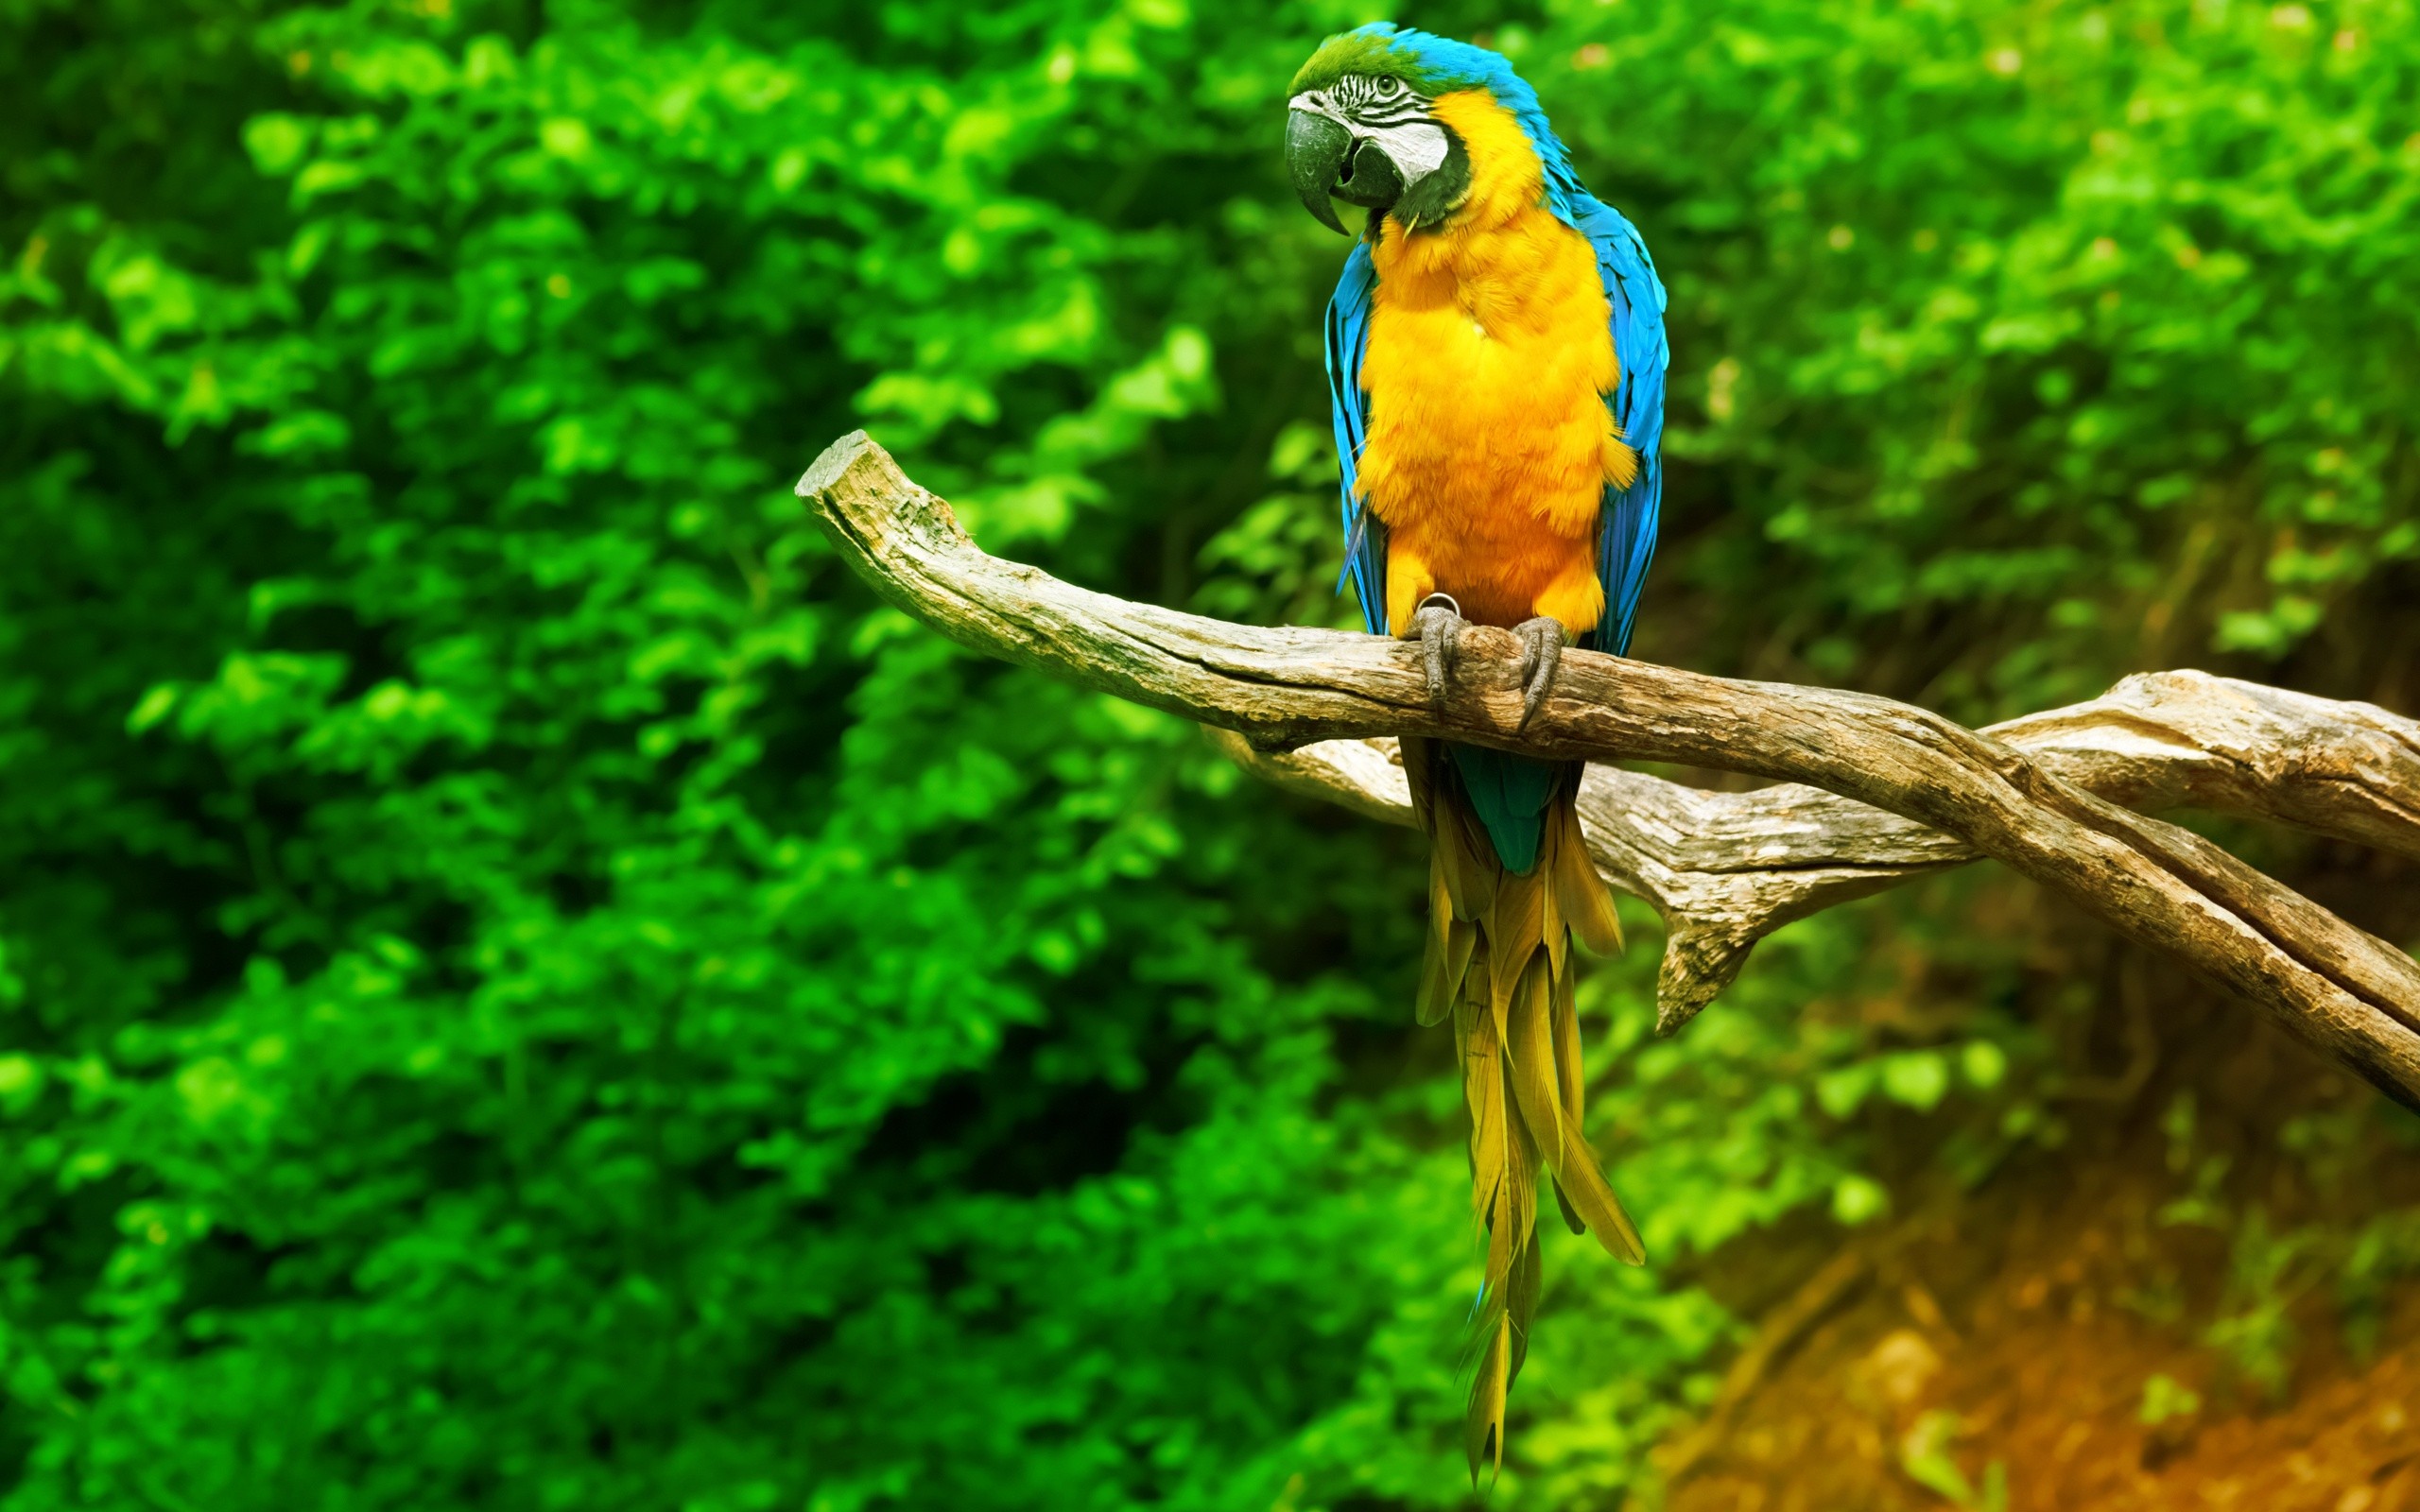 General 2560x1600 parrot birds animals wildlife nature Blue-and-Yellow Macaw macaws